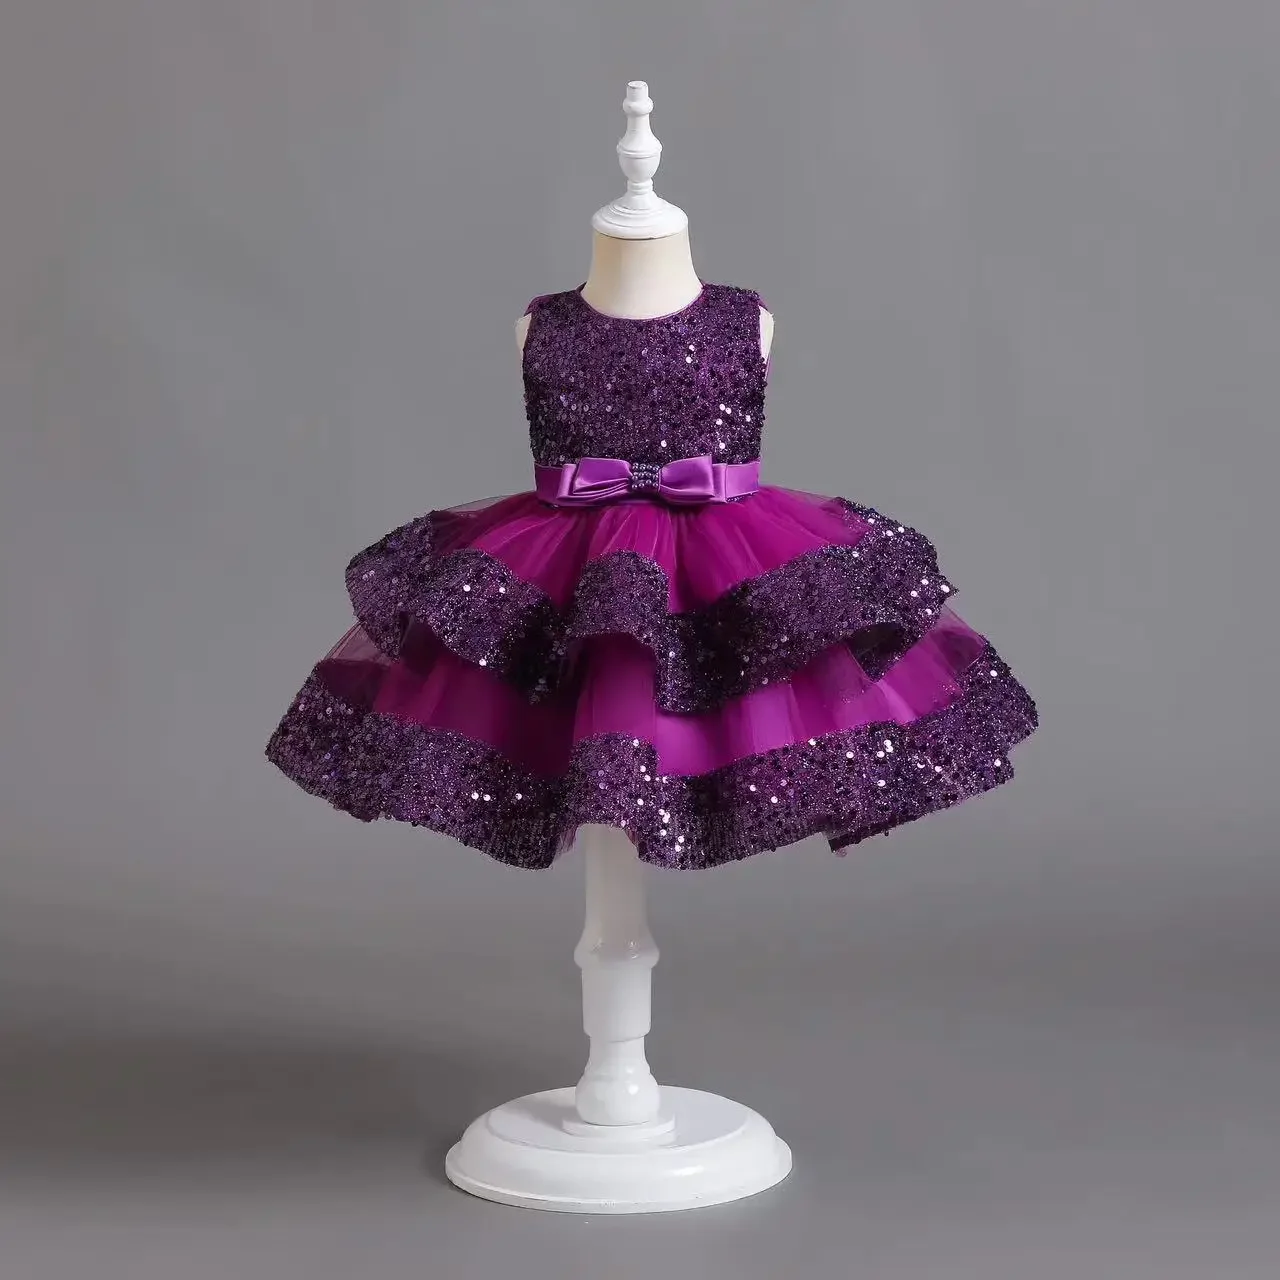 

1-6 Years Elegant Wedding Birthday Dresses For Girls Sequins Layered Kids Party Ball Gown Children's Formal Graduation Clothes